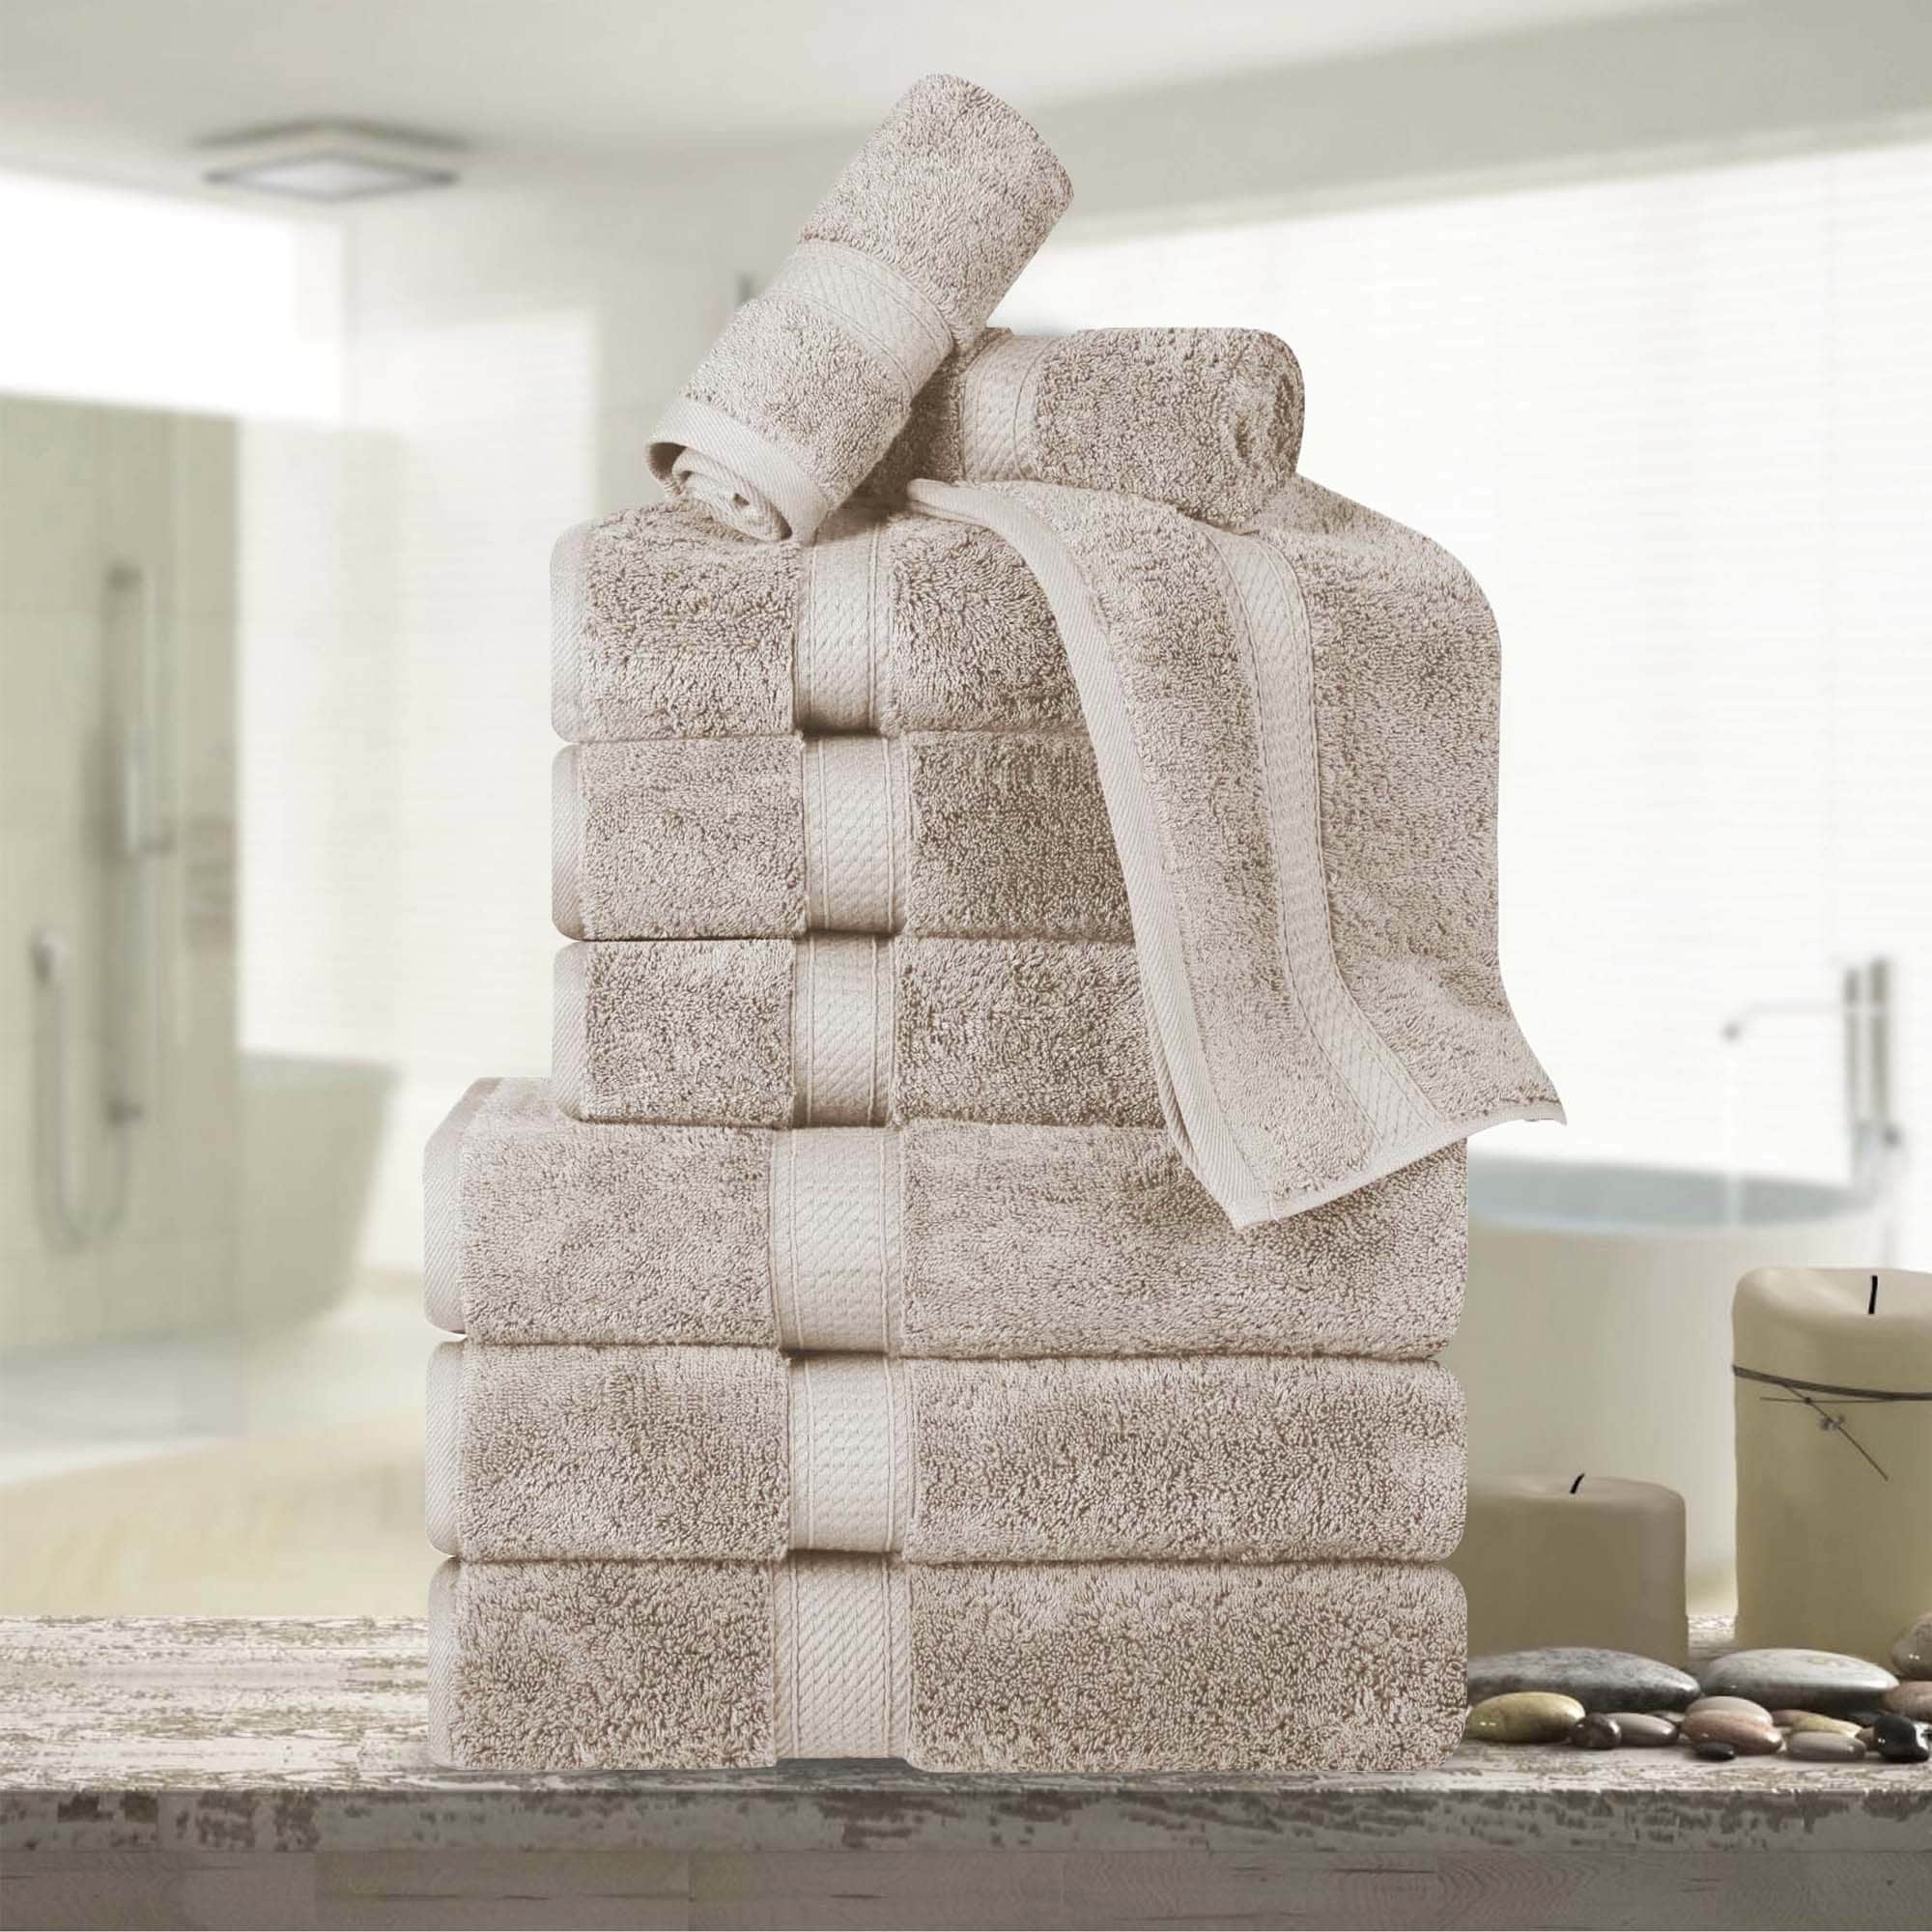 https://ak1.ostkcdn.com/images/products/is/images/direct/f347278528fb57c74ff033ddca1d5dea2e4cd5f1/Superior-Madison-Egyptian-Cotton-Heavyweight-Luxury-9-Piece-Towel-Set.jpg